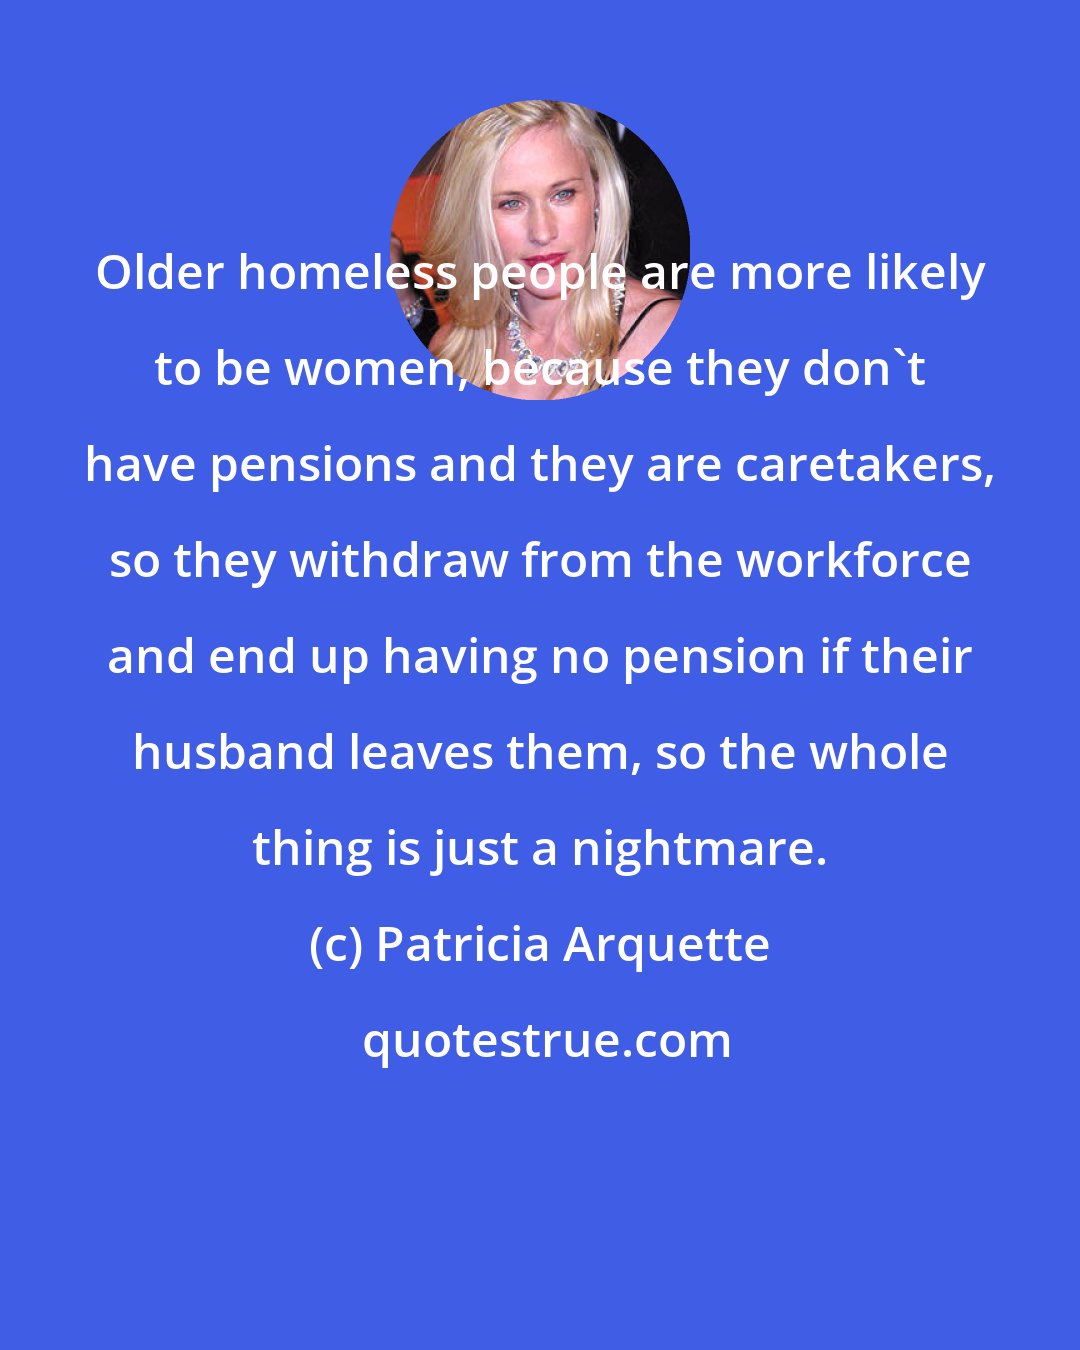 Patricia Arquette: Older homeless people are more likely to be women, because they don't have pensions and they are caretakers, so they withdraw from the workforce and end up having no pension if their husband leaves them, so the whole thing is just a nightmare.